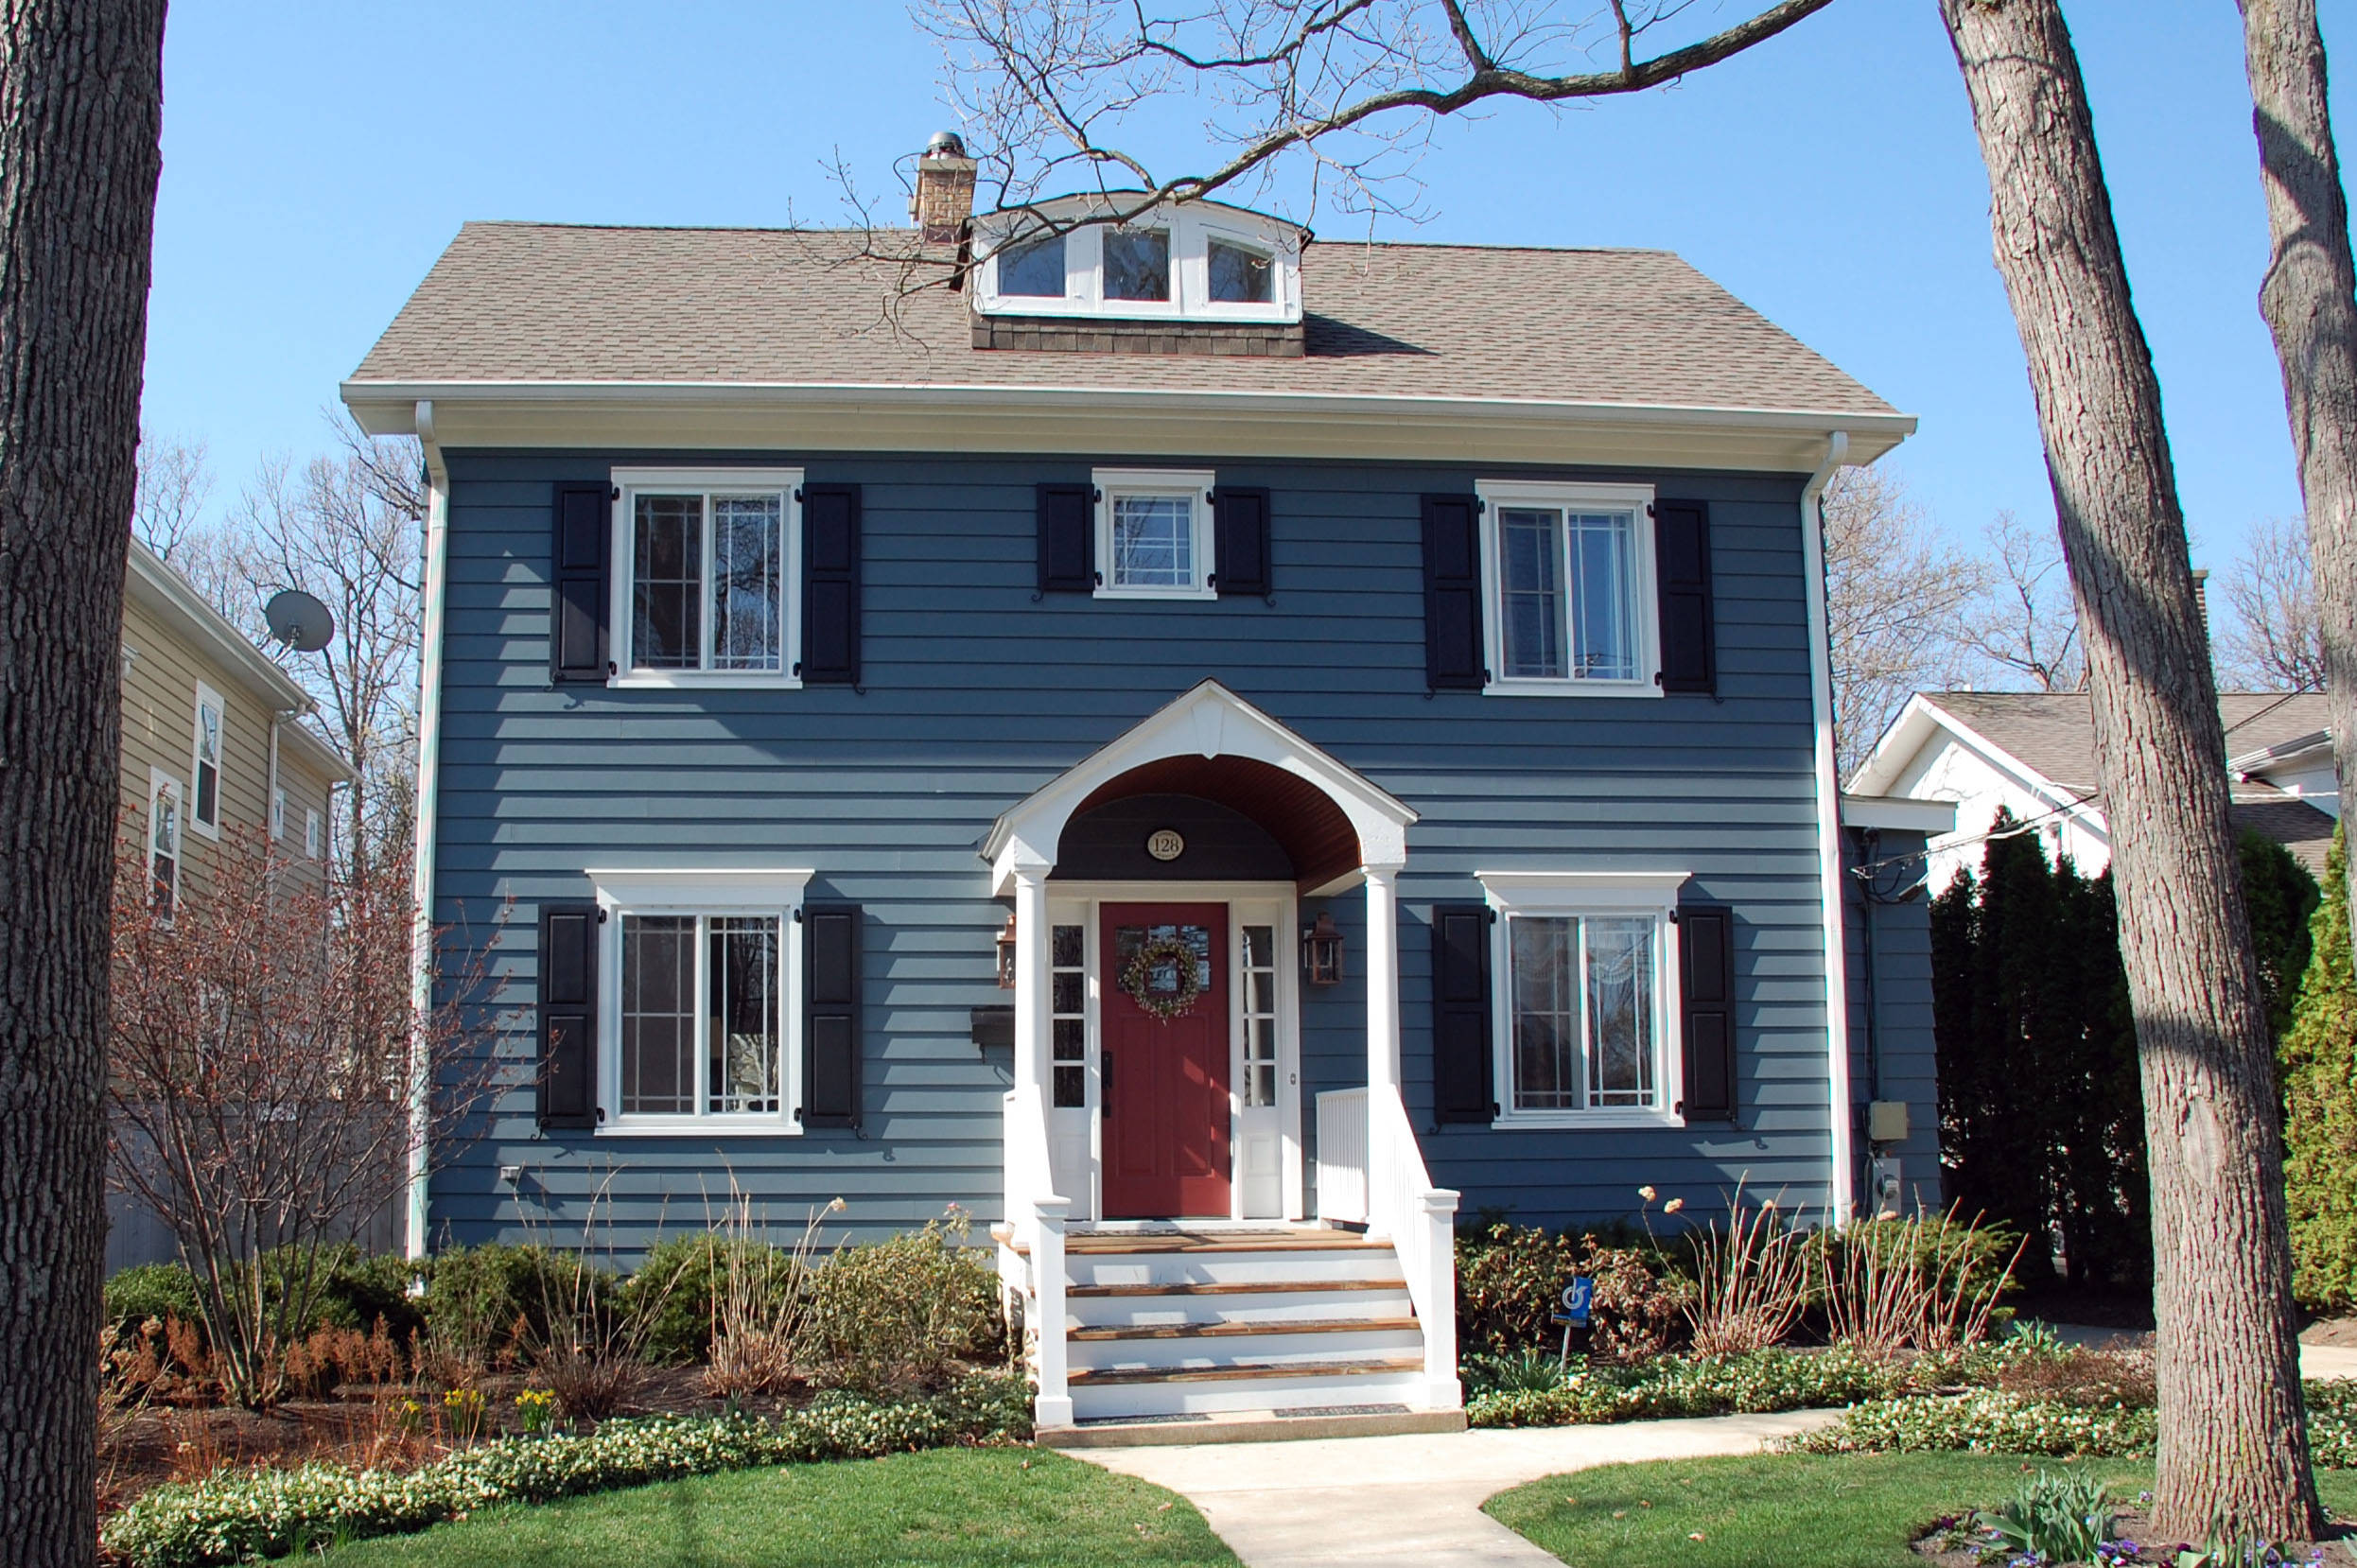 75 Blue House Exterior Ideas You'Ll Love - May, 2023 | Houzz